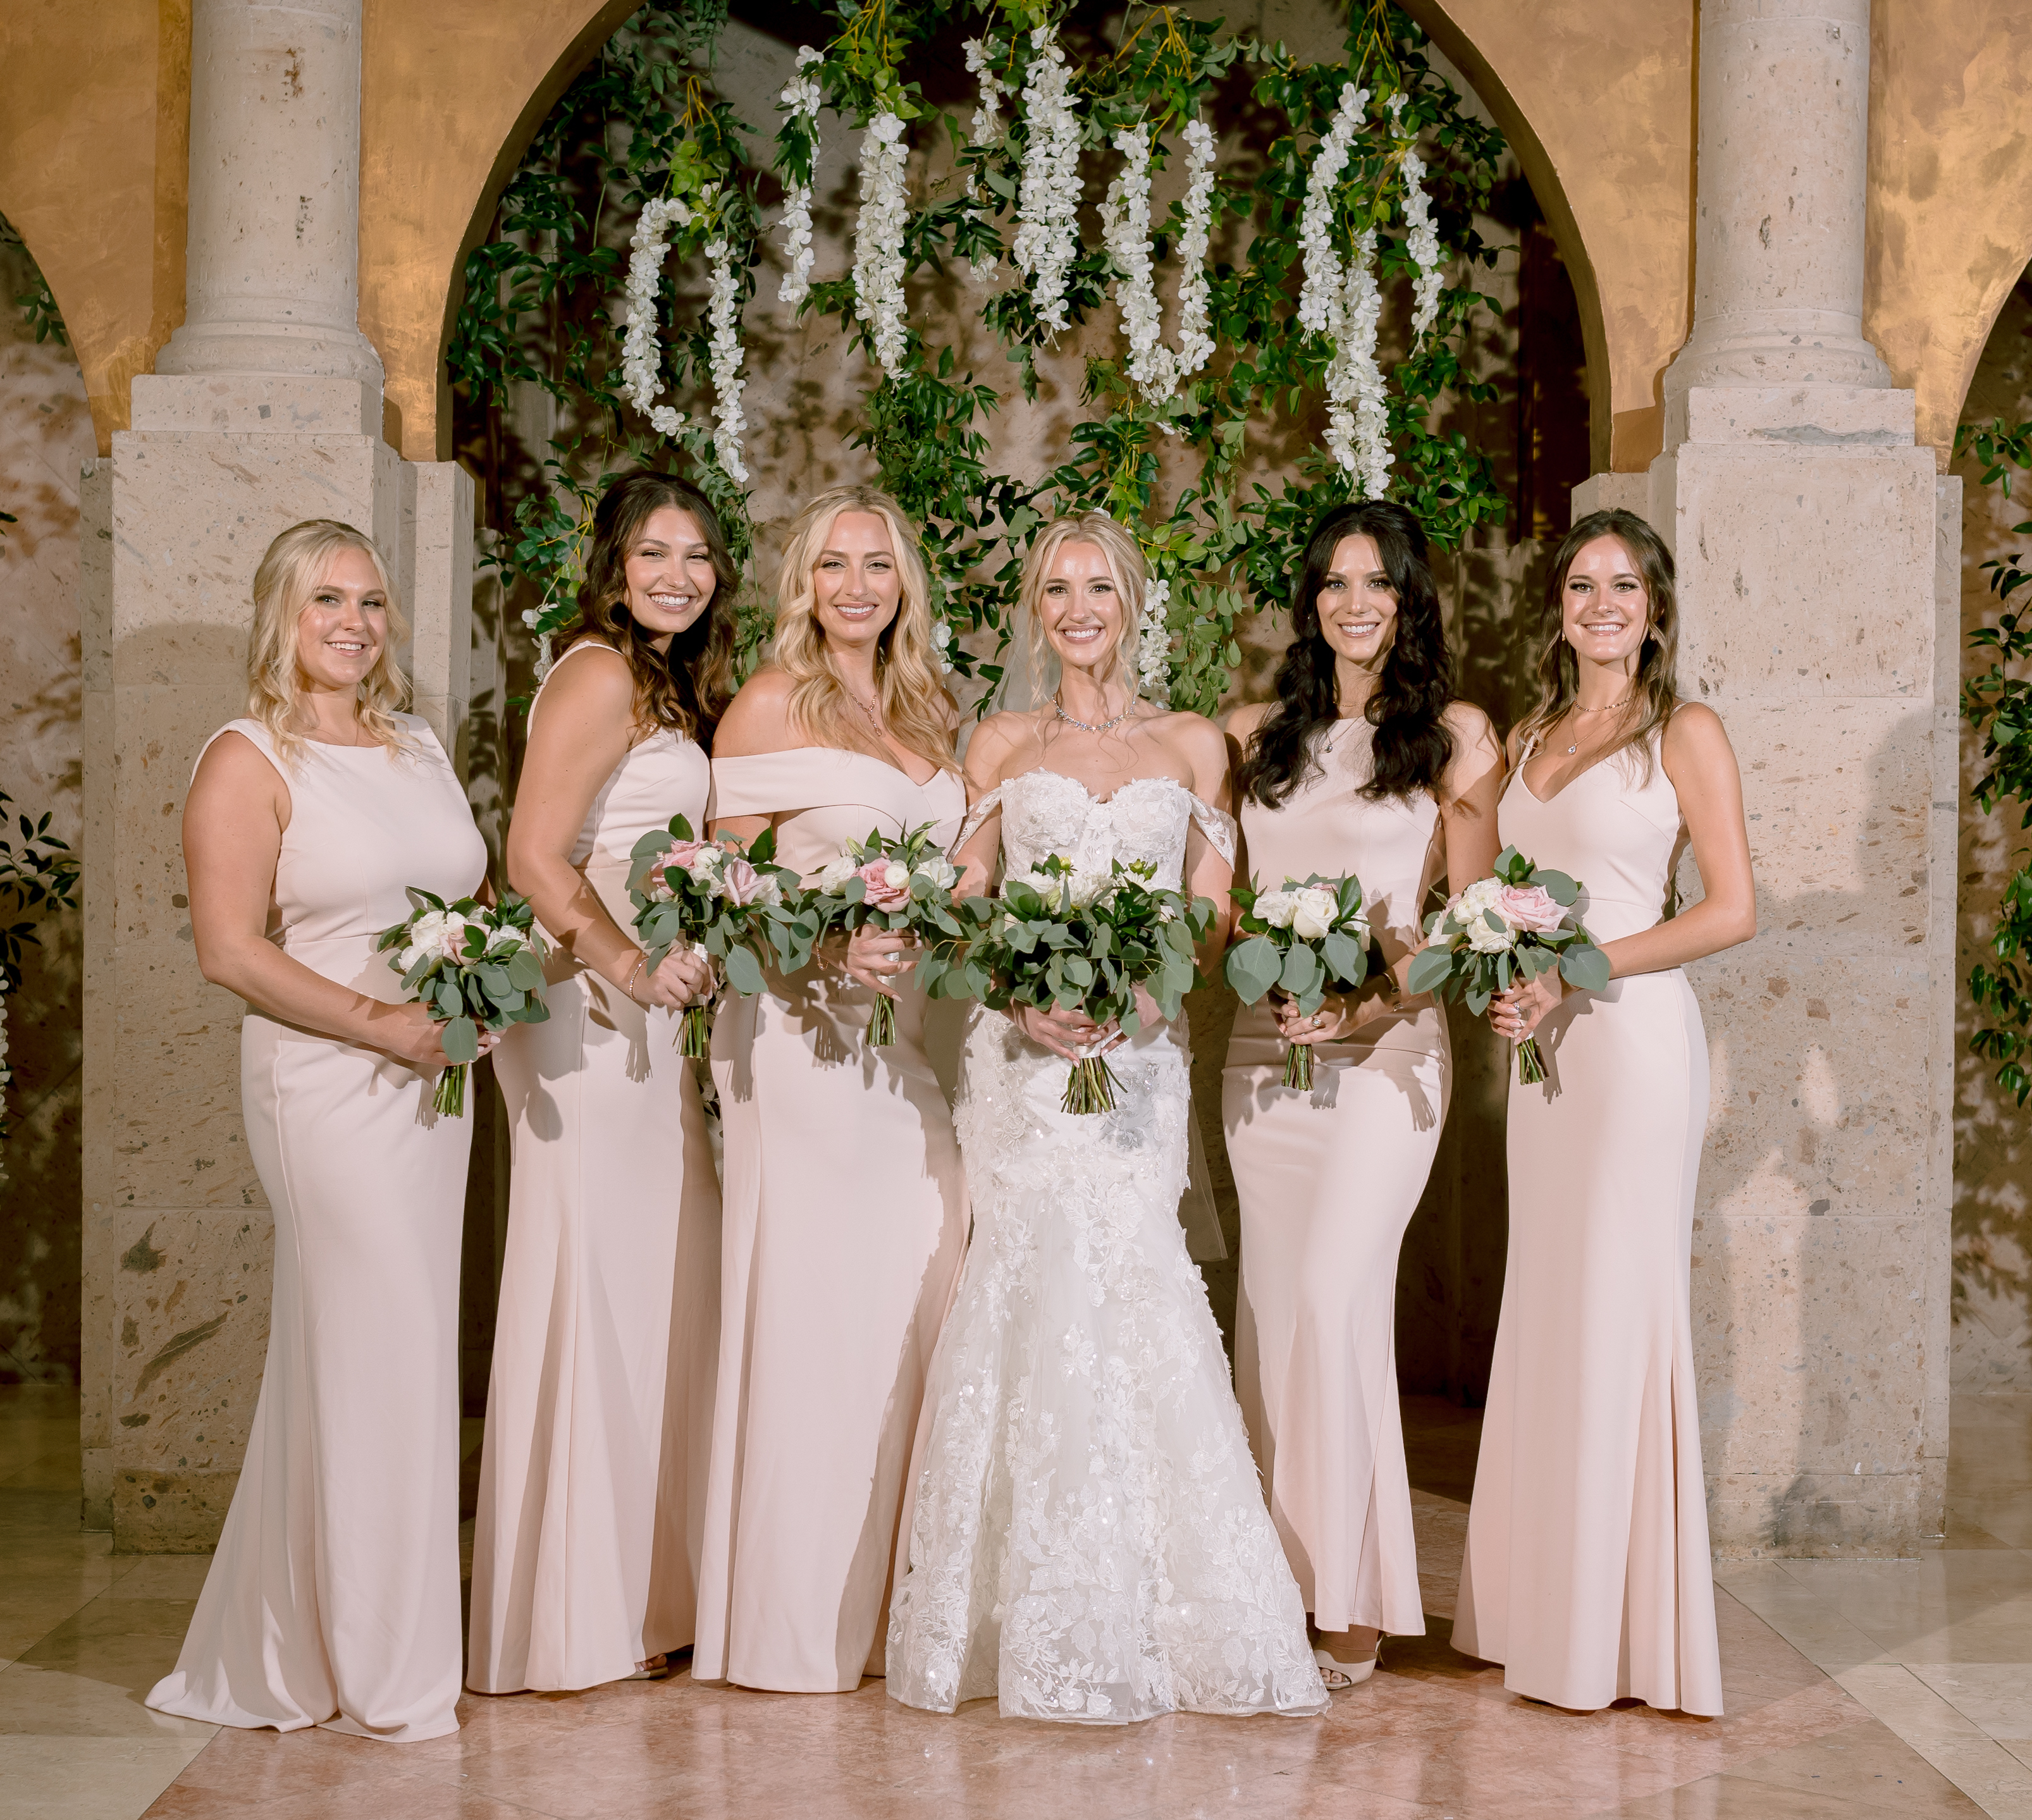 The bride and her bridesmaids smile in front of the wisteria at her greenery-filled wedding.